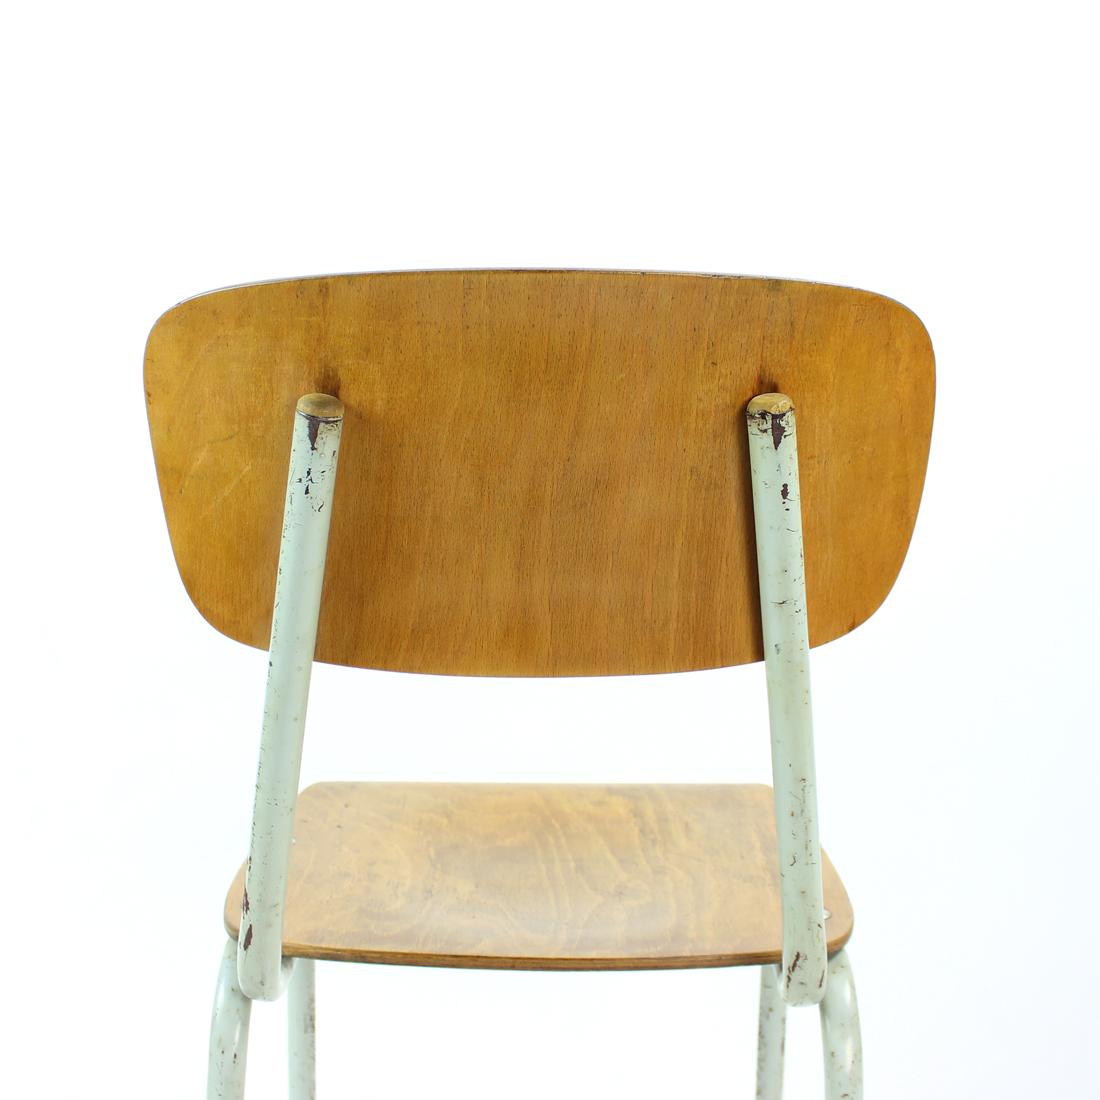 School Chair In Metal And Plywood, Kovona, Czechoslovakia 1960s For Sale 2